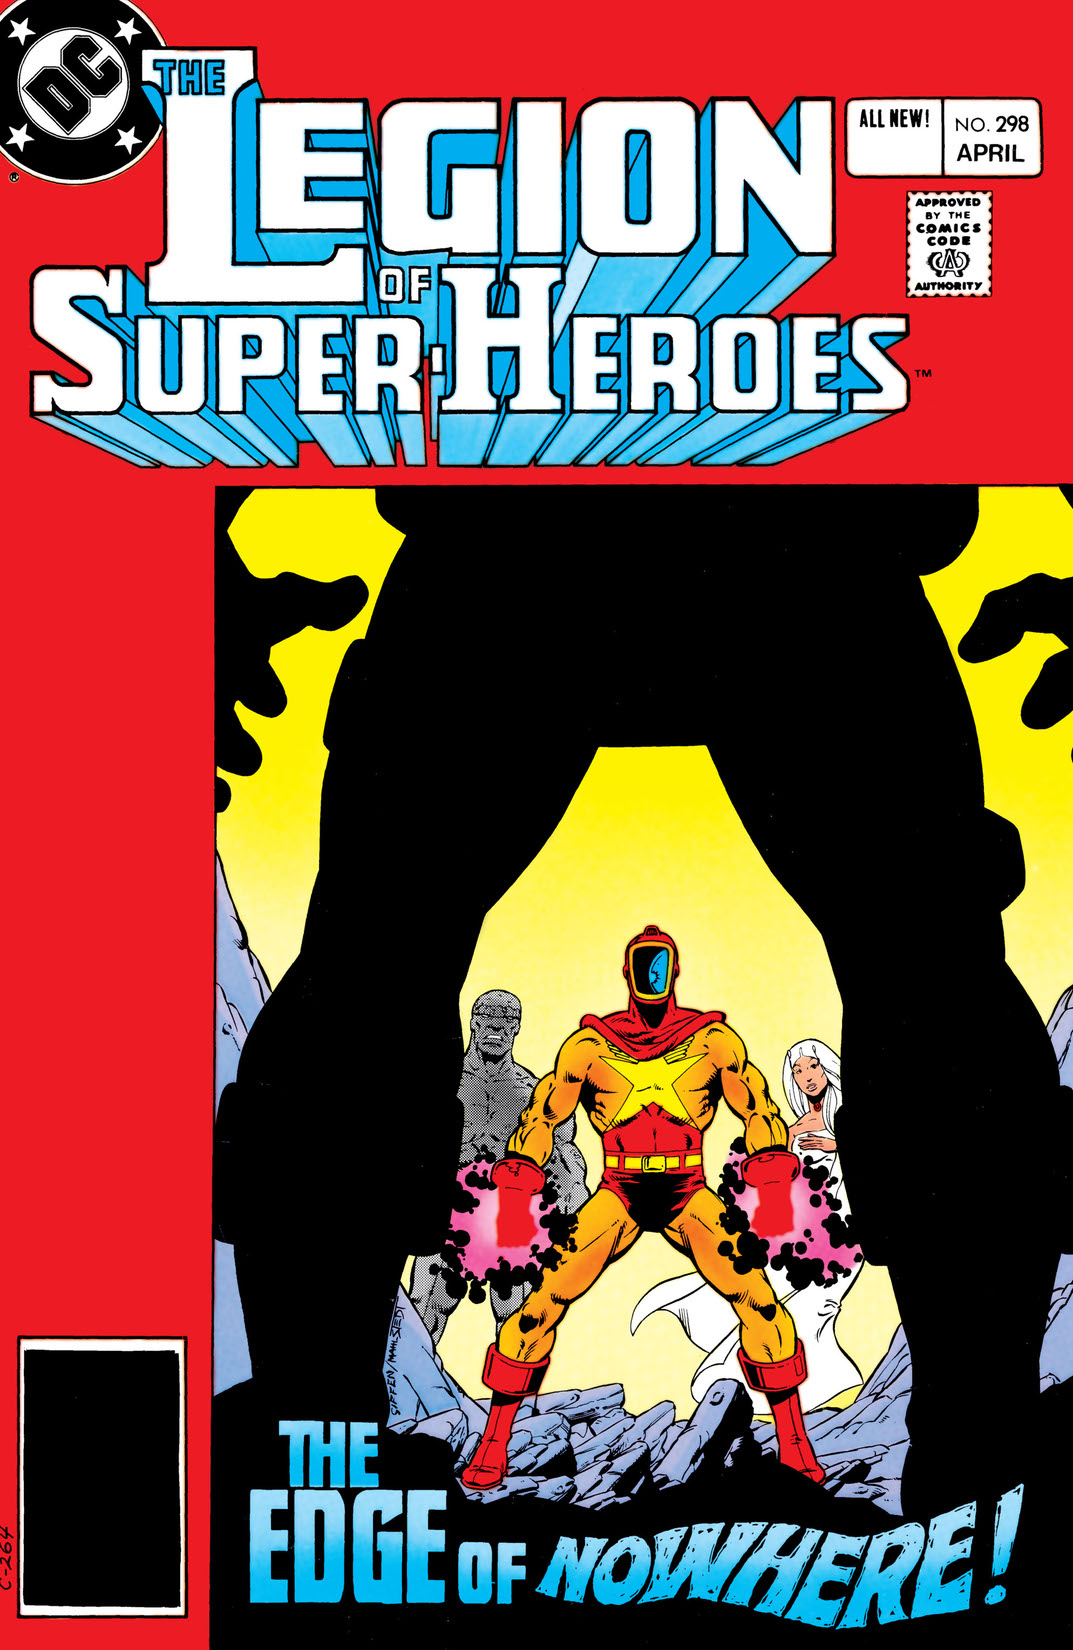 The Legion of Super-Heroes (1980-) #298 preview images